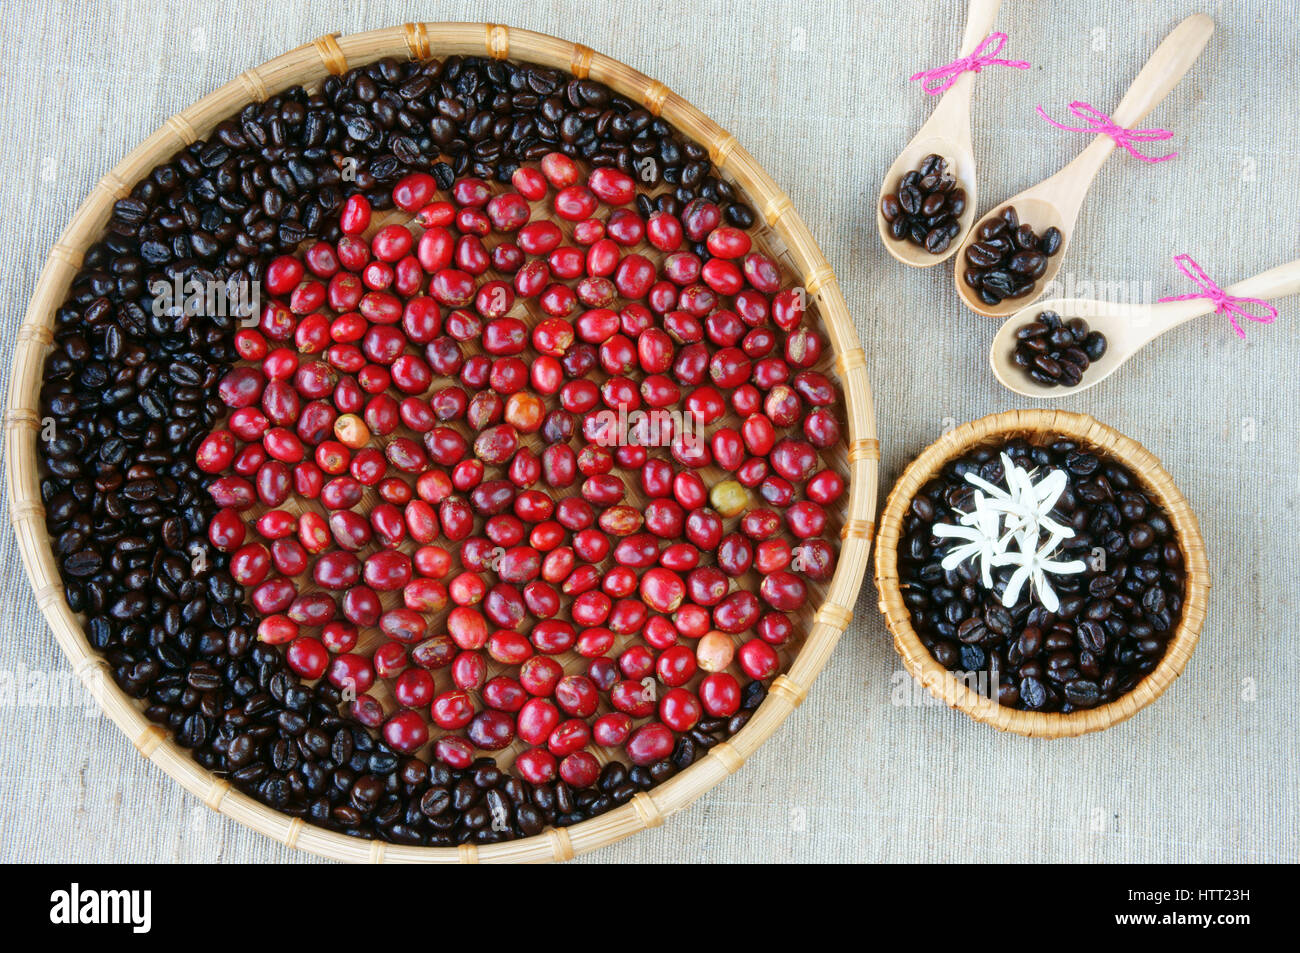 Collect of cafe, red ripe berries, roasted cofee bean, white flower on bamboo basket with sackcloth background, agriculture product at Vietnam, harmon Stock Photo